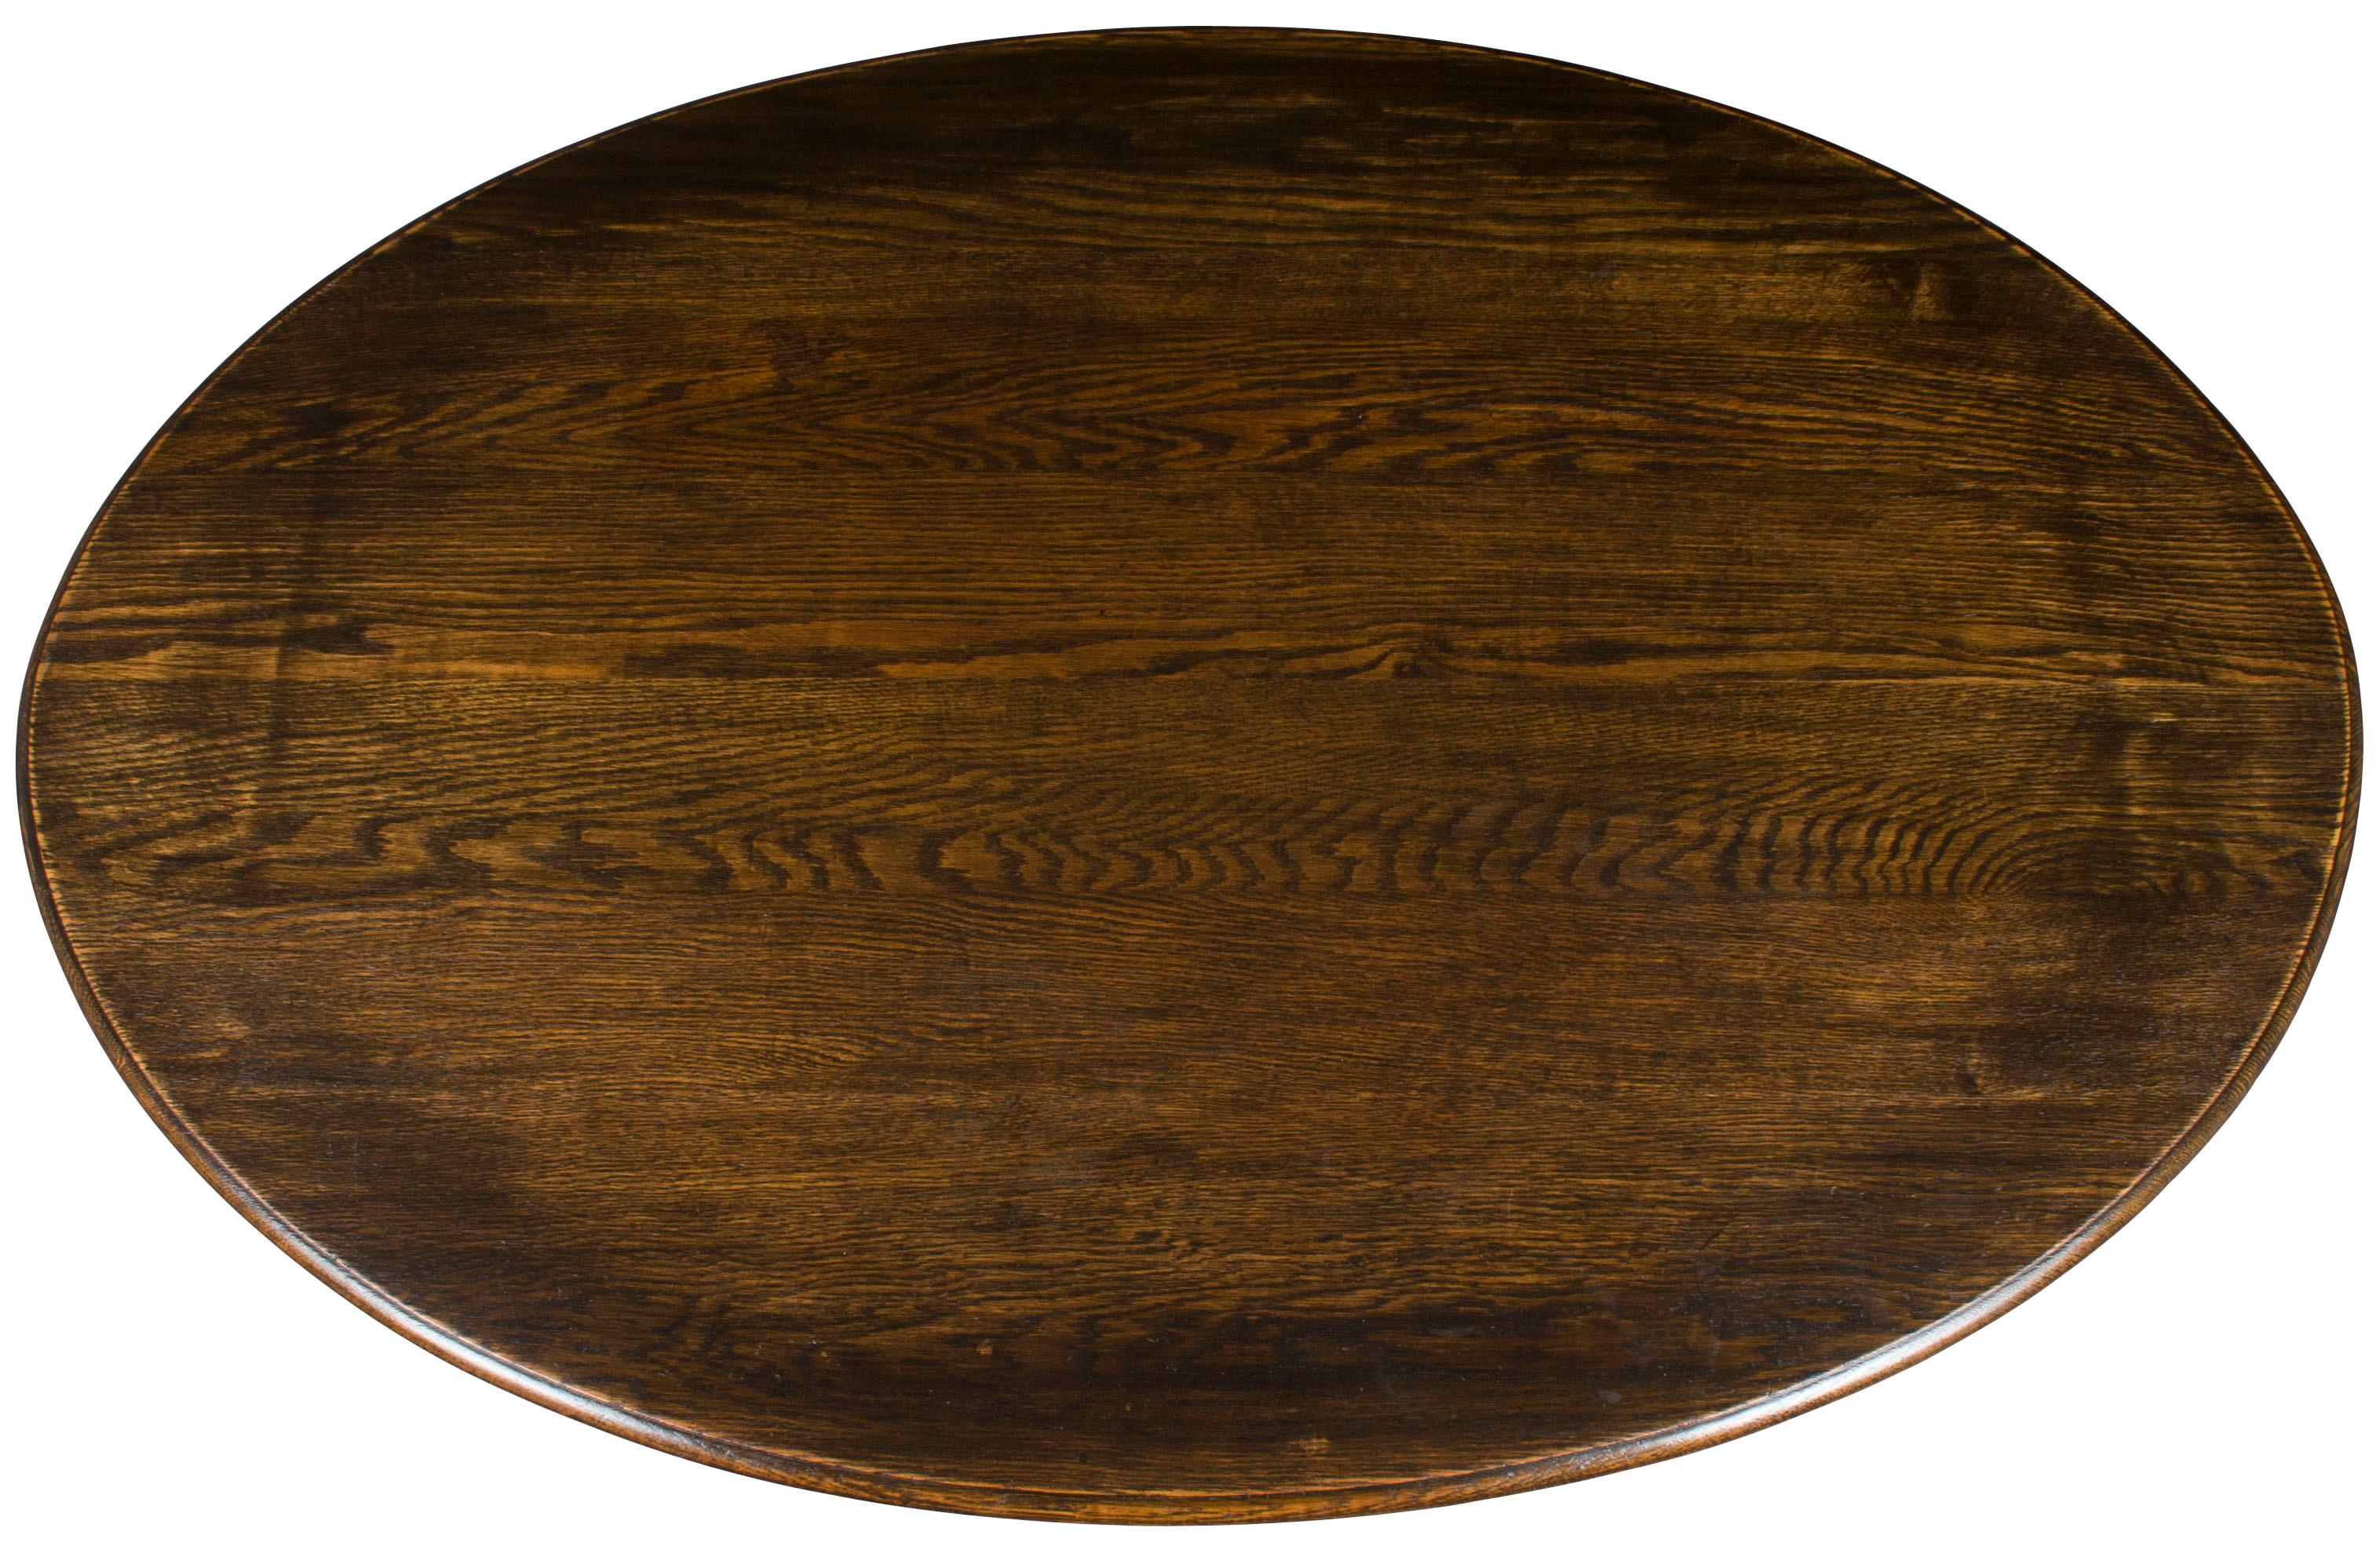 Made circa 1920 in England, this oak oval dining table is a great size for a variety of applications. It makes a wonderful rustic dining or breakfast room table. Also, it can be used in a large foyer or other area as a centre table. It would look